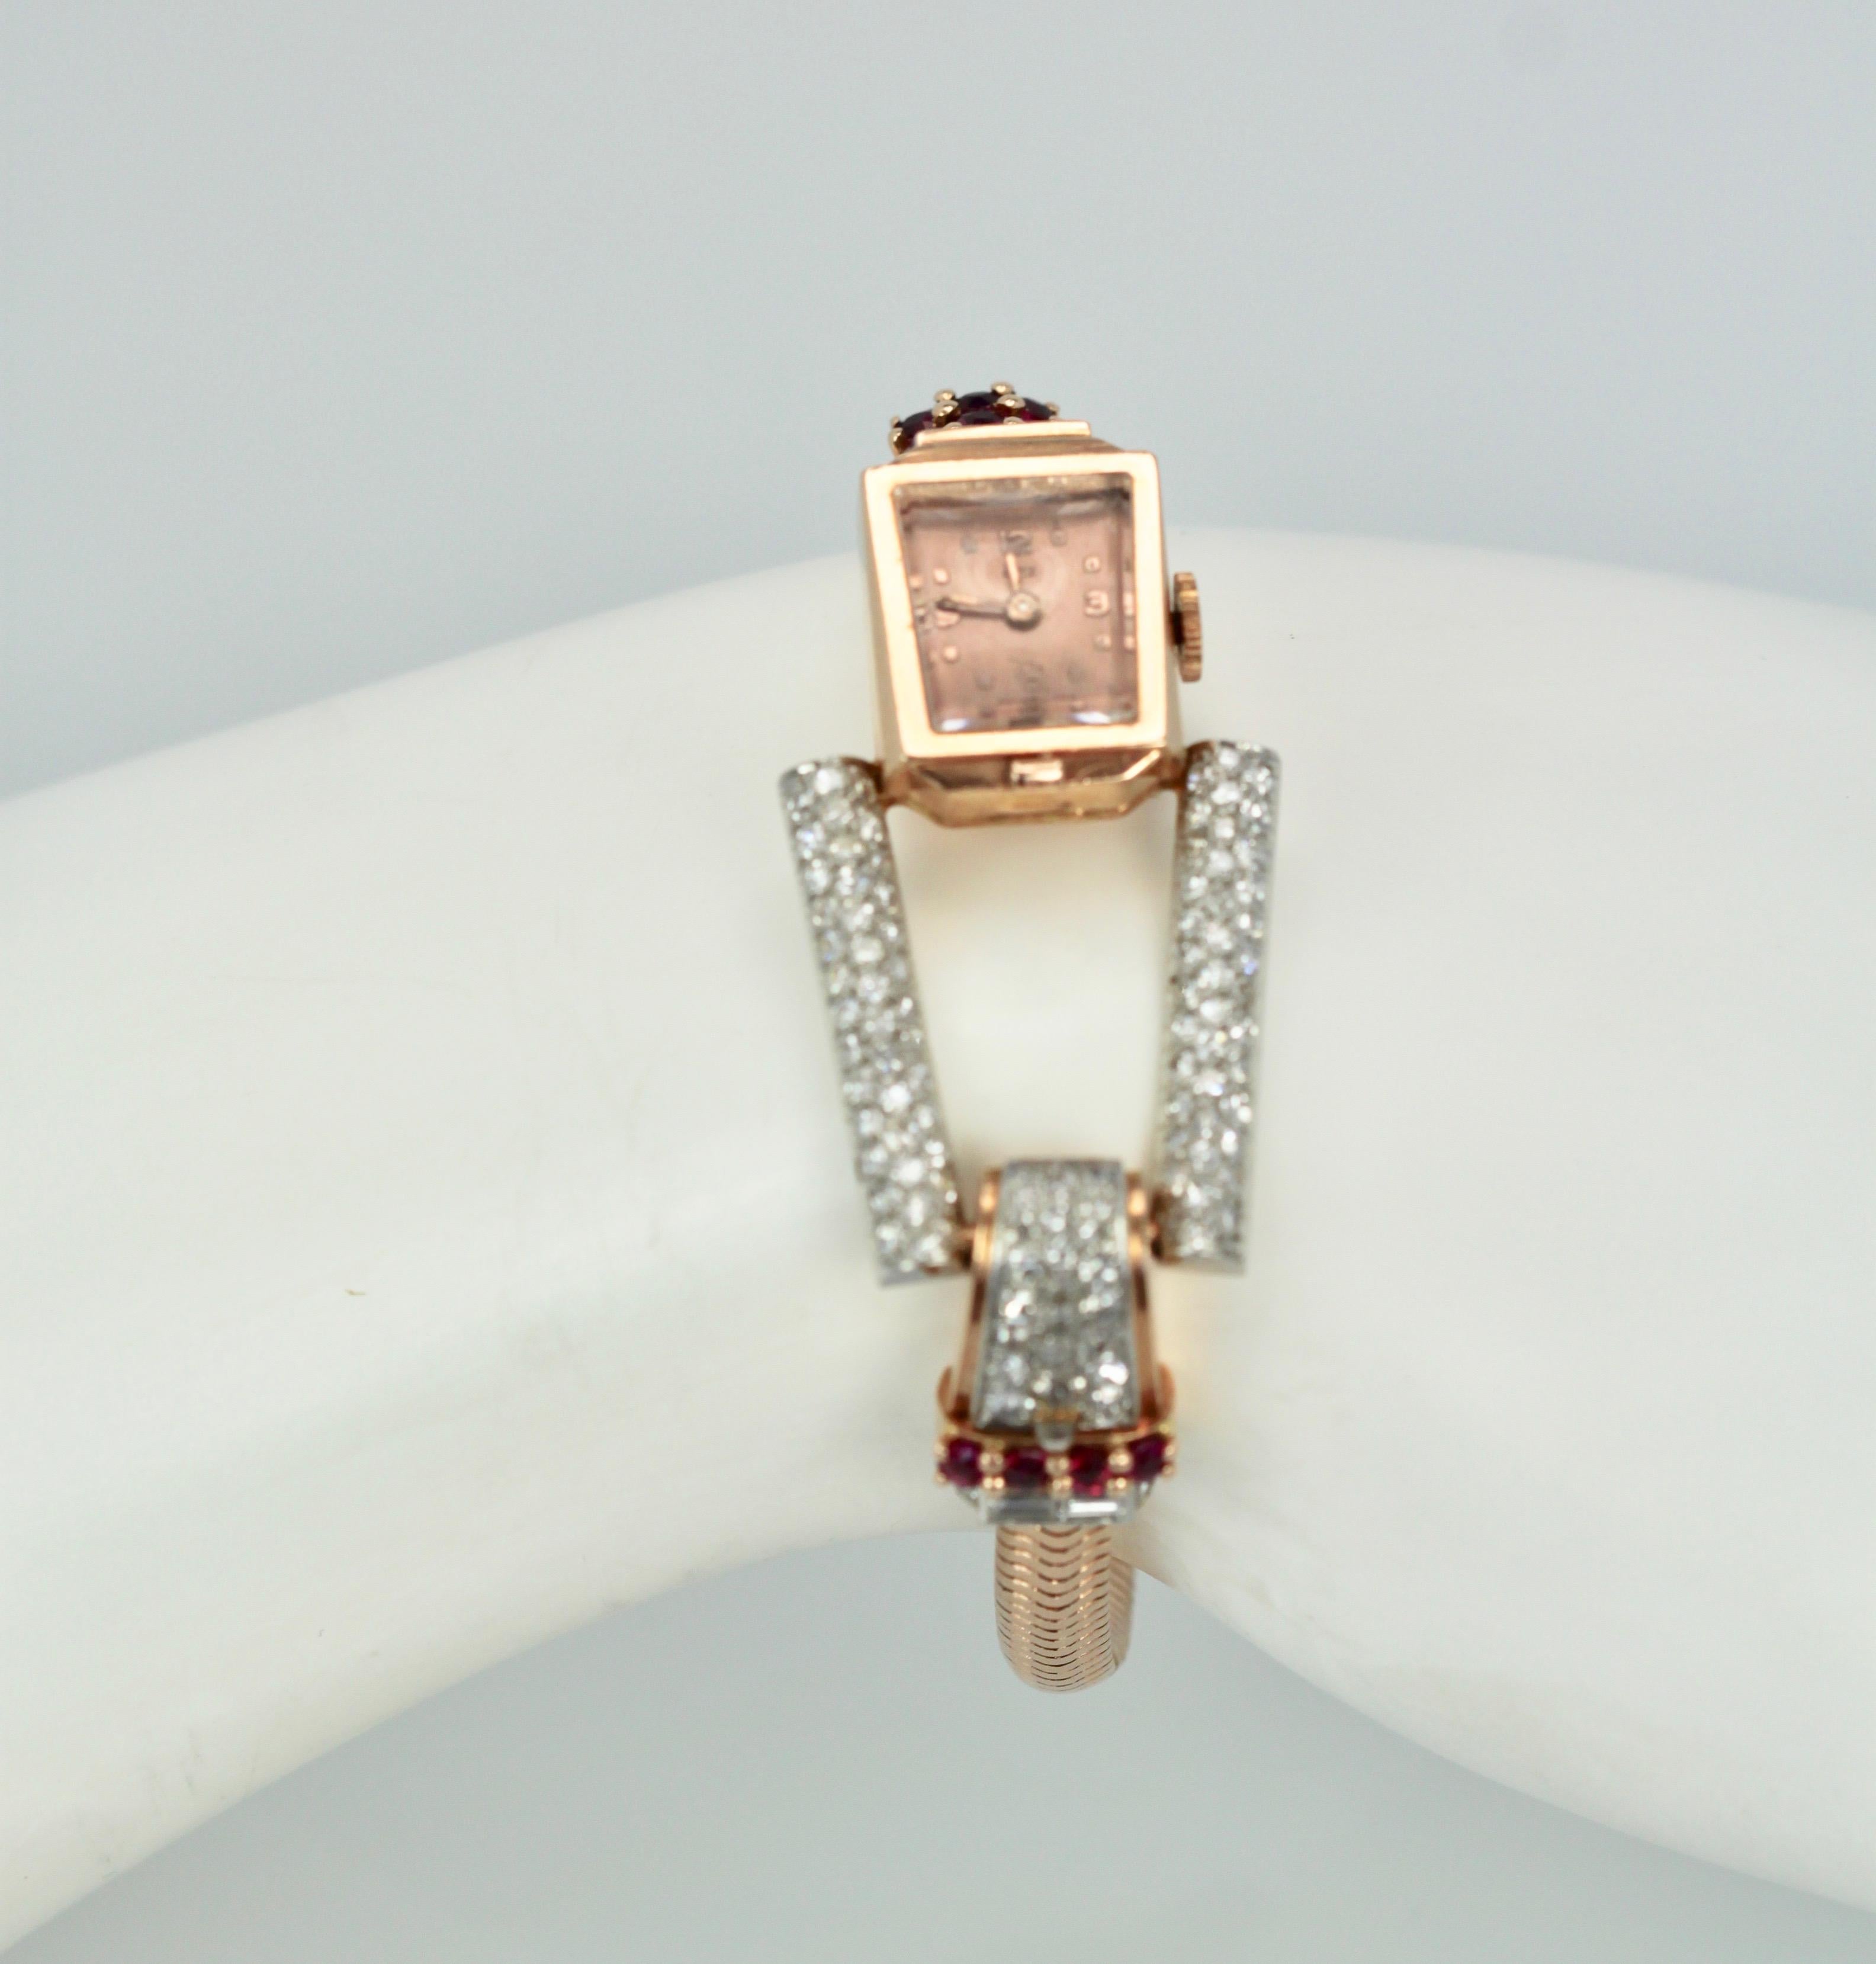 Retro 14 Karat Ruby Diamond Watch Ciny Watch Co. Le Noirmont, circa 1940s In Good Condition For Sale In North Hollywood, CA